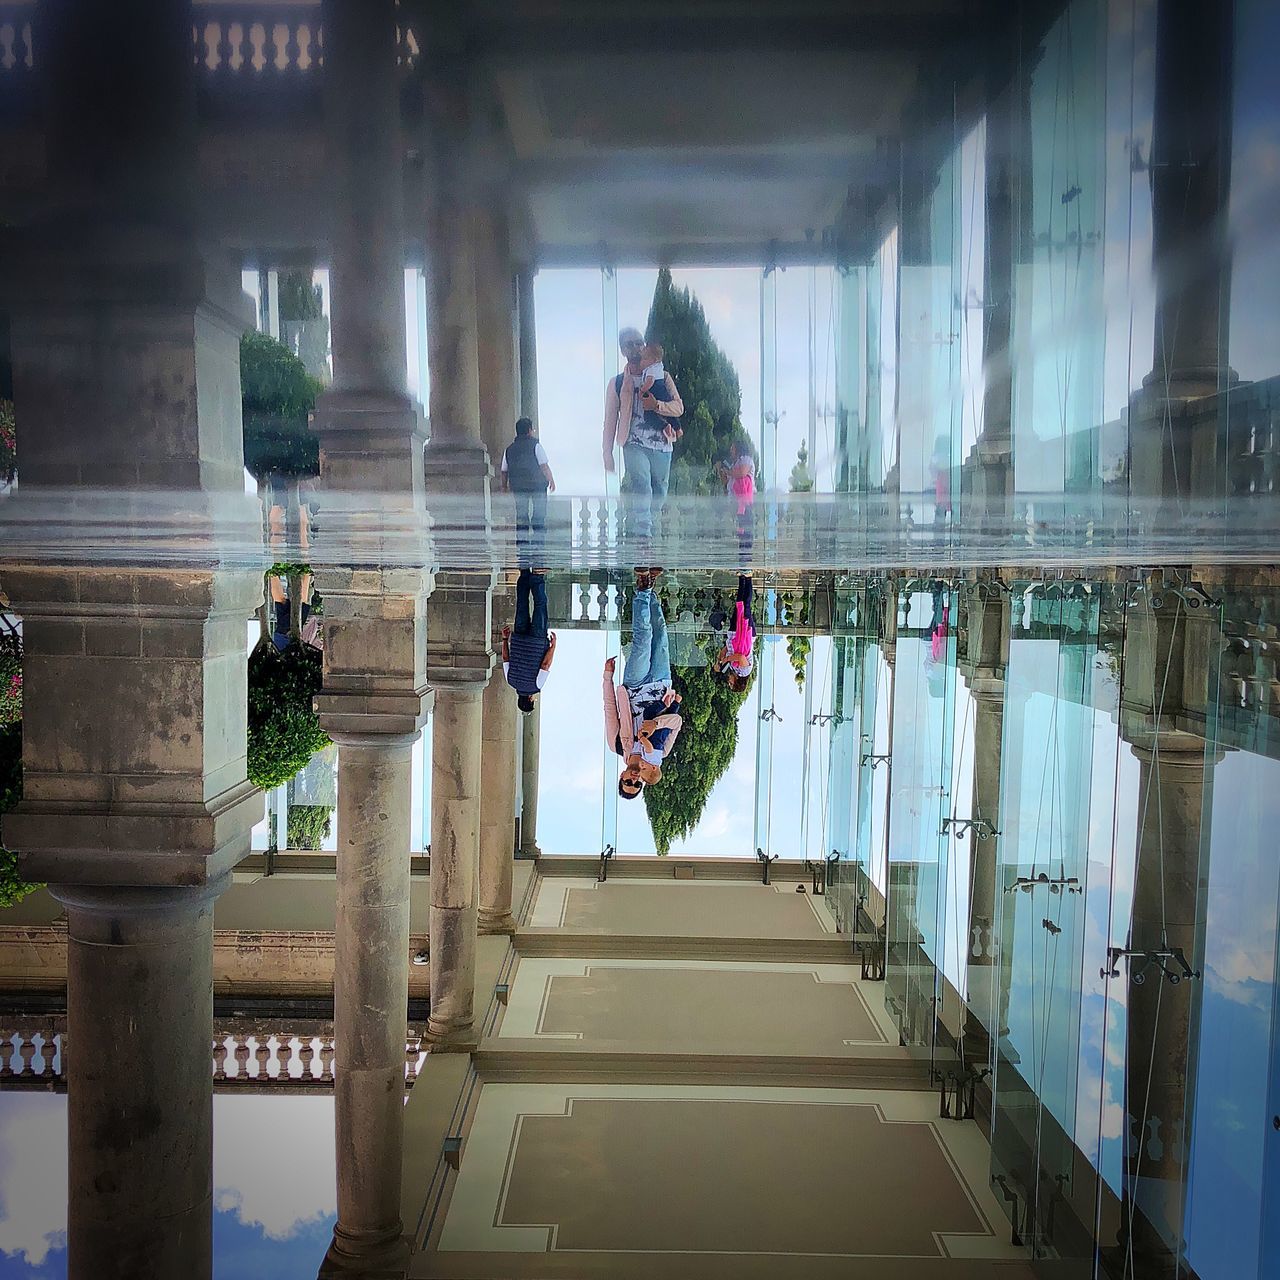 architecture, built structure, reflection, real people, day, women, architectural column, incidental people, one person, water, lifestyles, building exterior, men, nature, building, adult, window, outdoors, swimming pool, reflecting pool